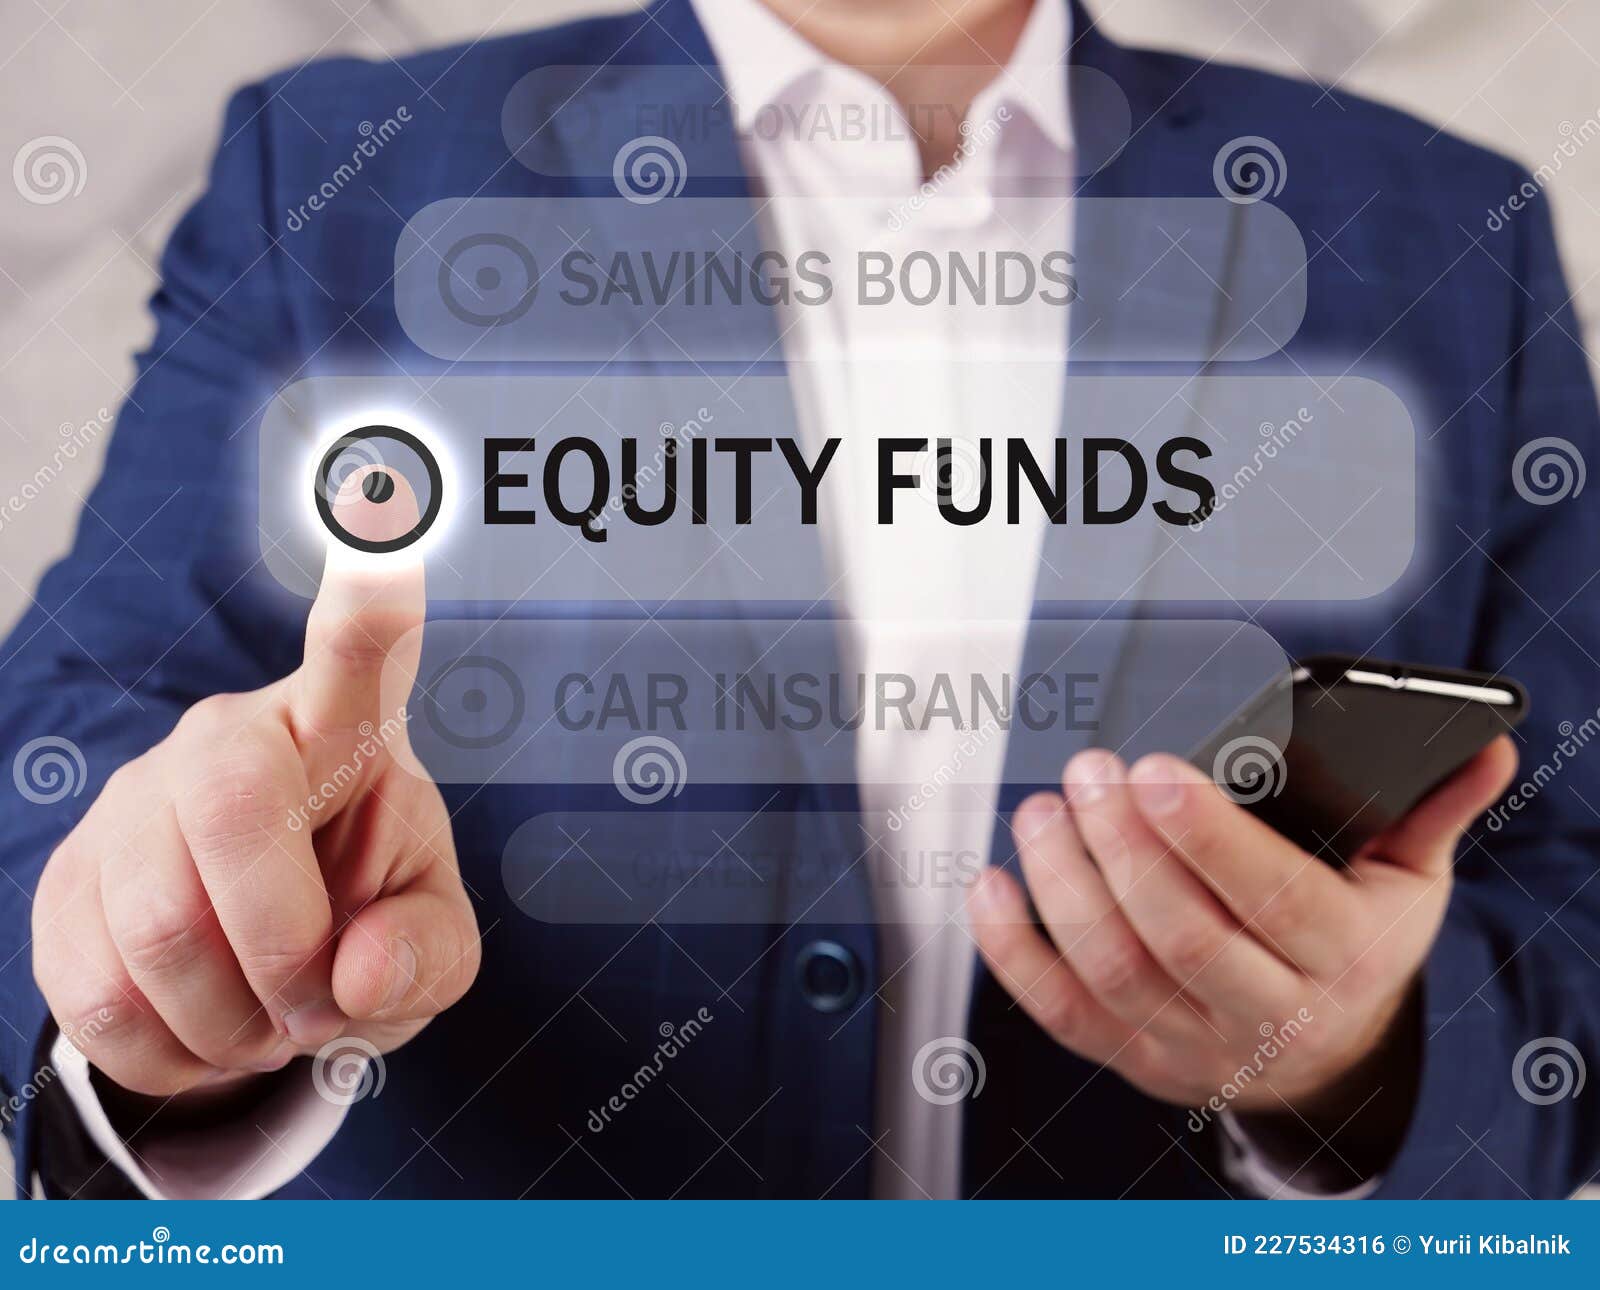 equity funds text in list. merchant looking for something at smartphone. anÃÂ equity fundÃÂ is aÃÂ mutual fundÃÂ that invests